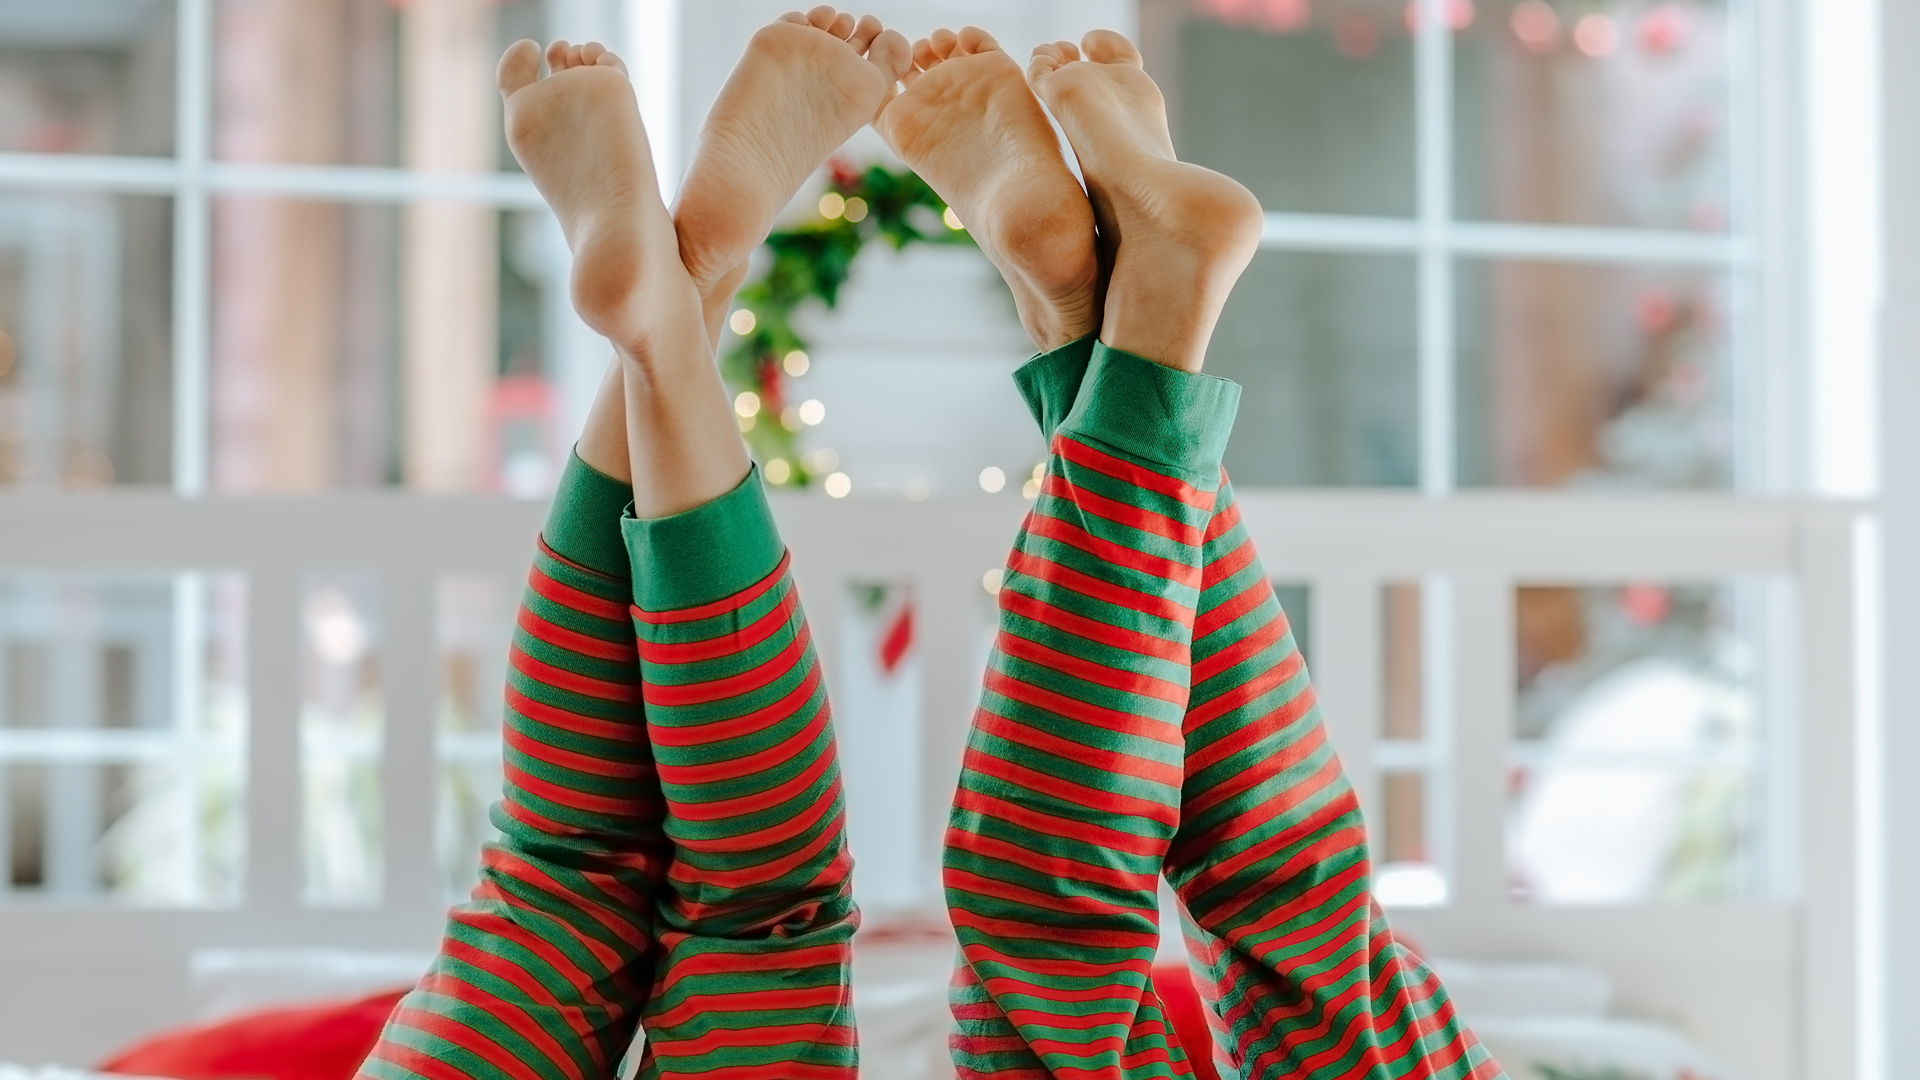 Upside down legs of a couple wearing matching red-green striped pyjamas.